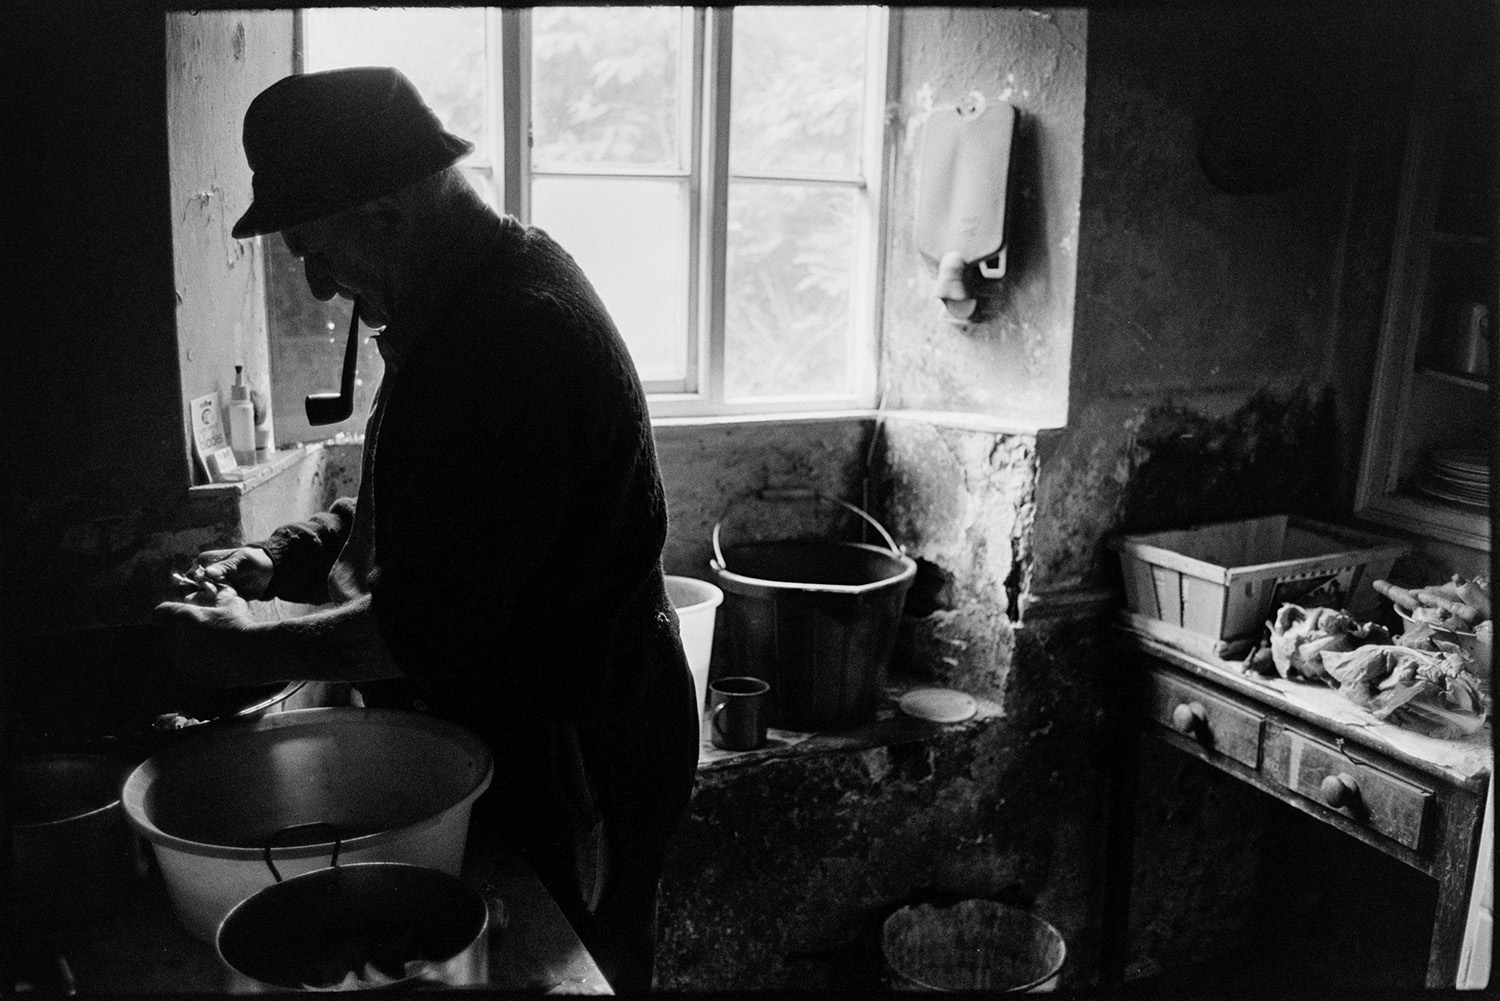 Farmer peeling potatoes and preparing meal in kitchen. Saucepans, vegetables, etc. 
[Archie Parkhouse peeling potatoes and placing them in a saucepan for a meal in his kitchen at Millhams, Dolton. He is smoking a pipe. A hot water bottle is hung up on the wall.]